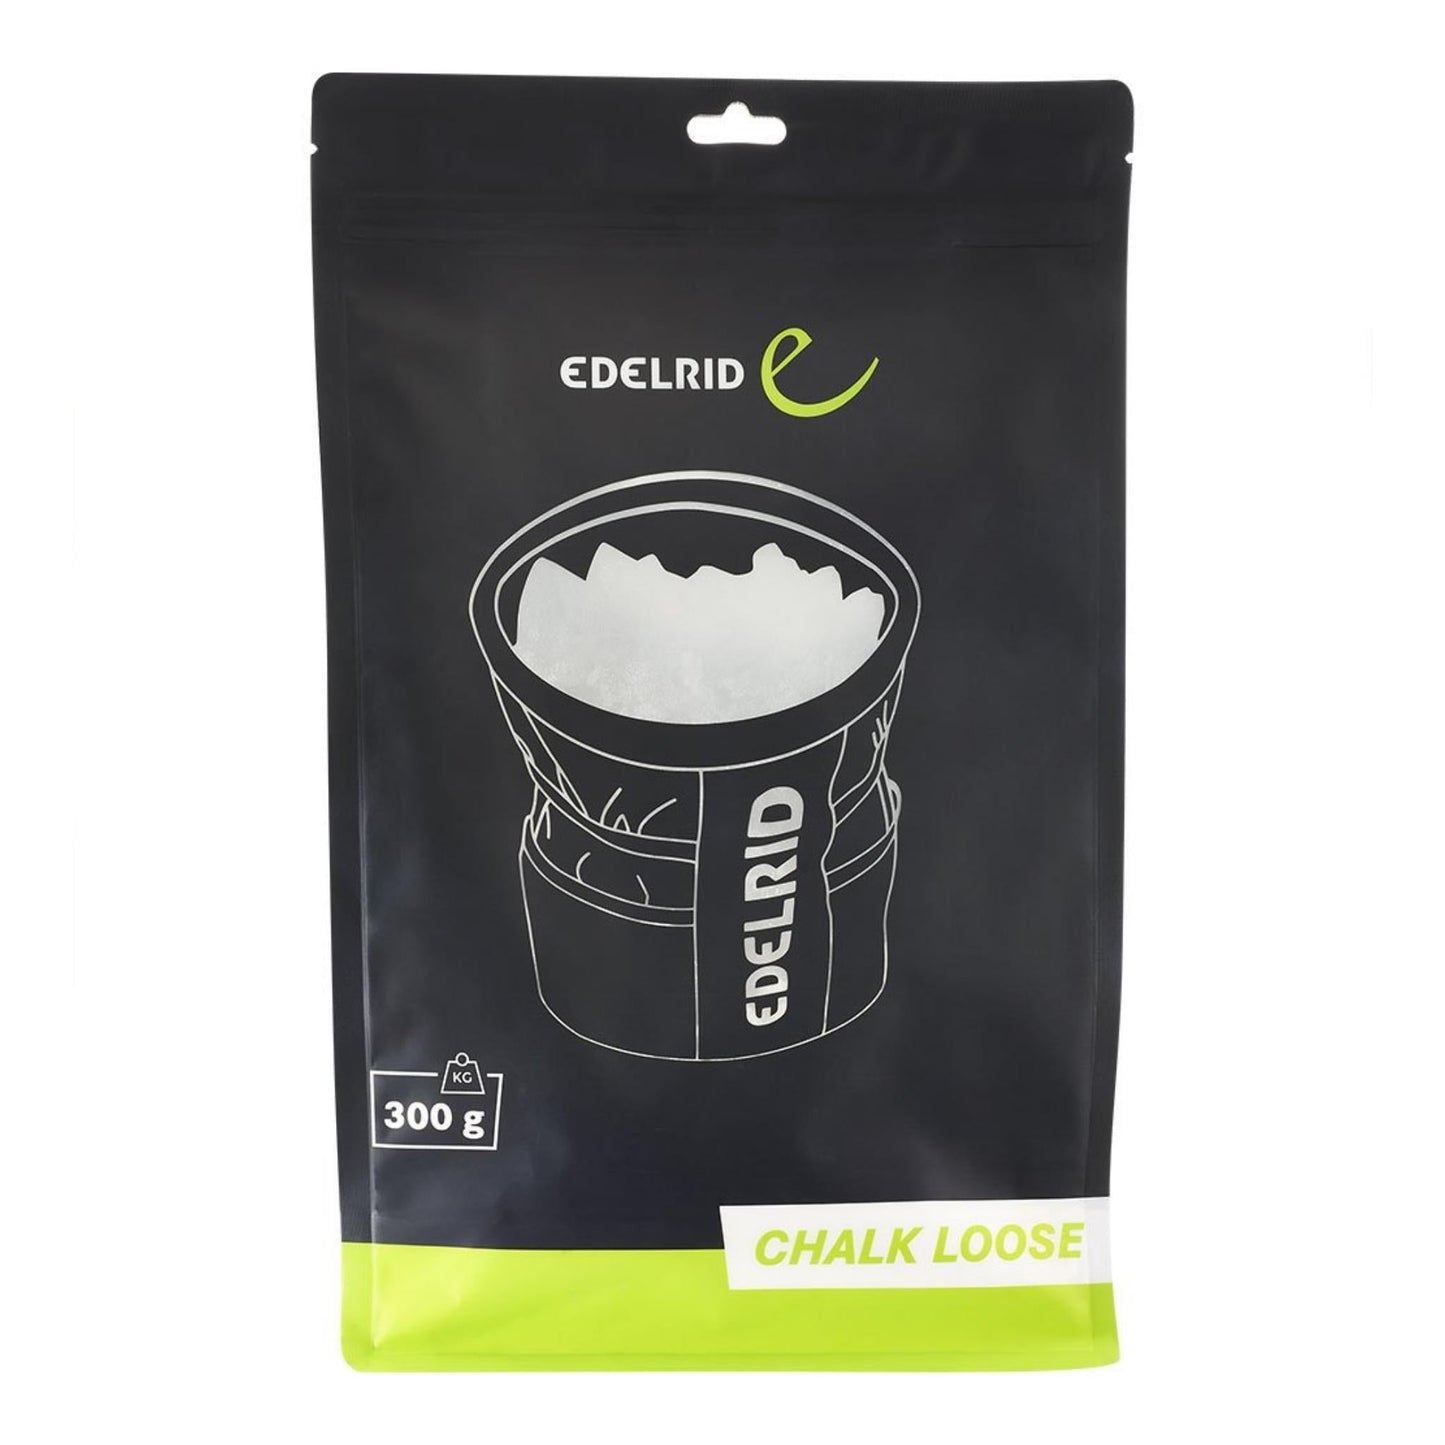 Edelrid - Chalk Loose - Climbing Accessories - 300g - The Cave Gym